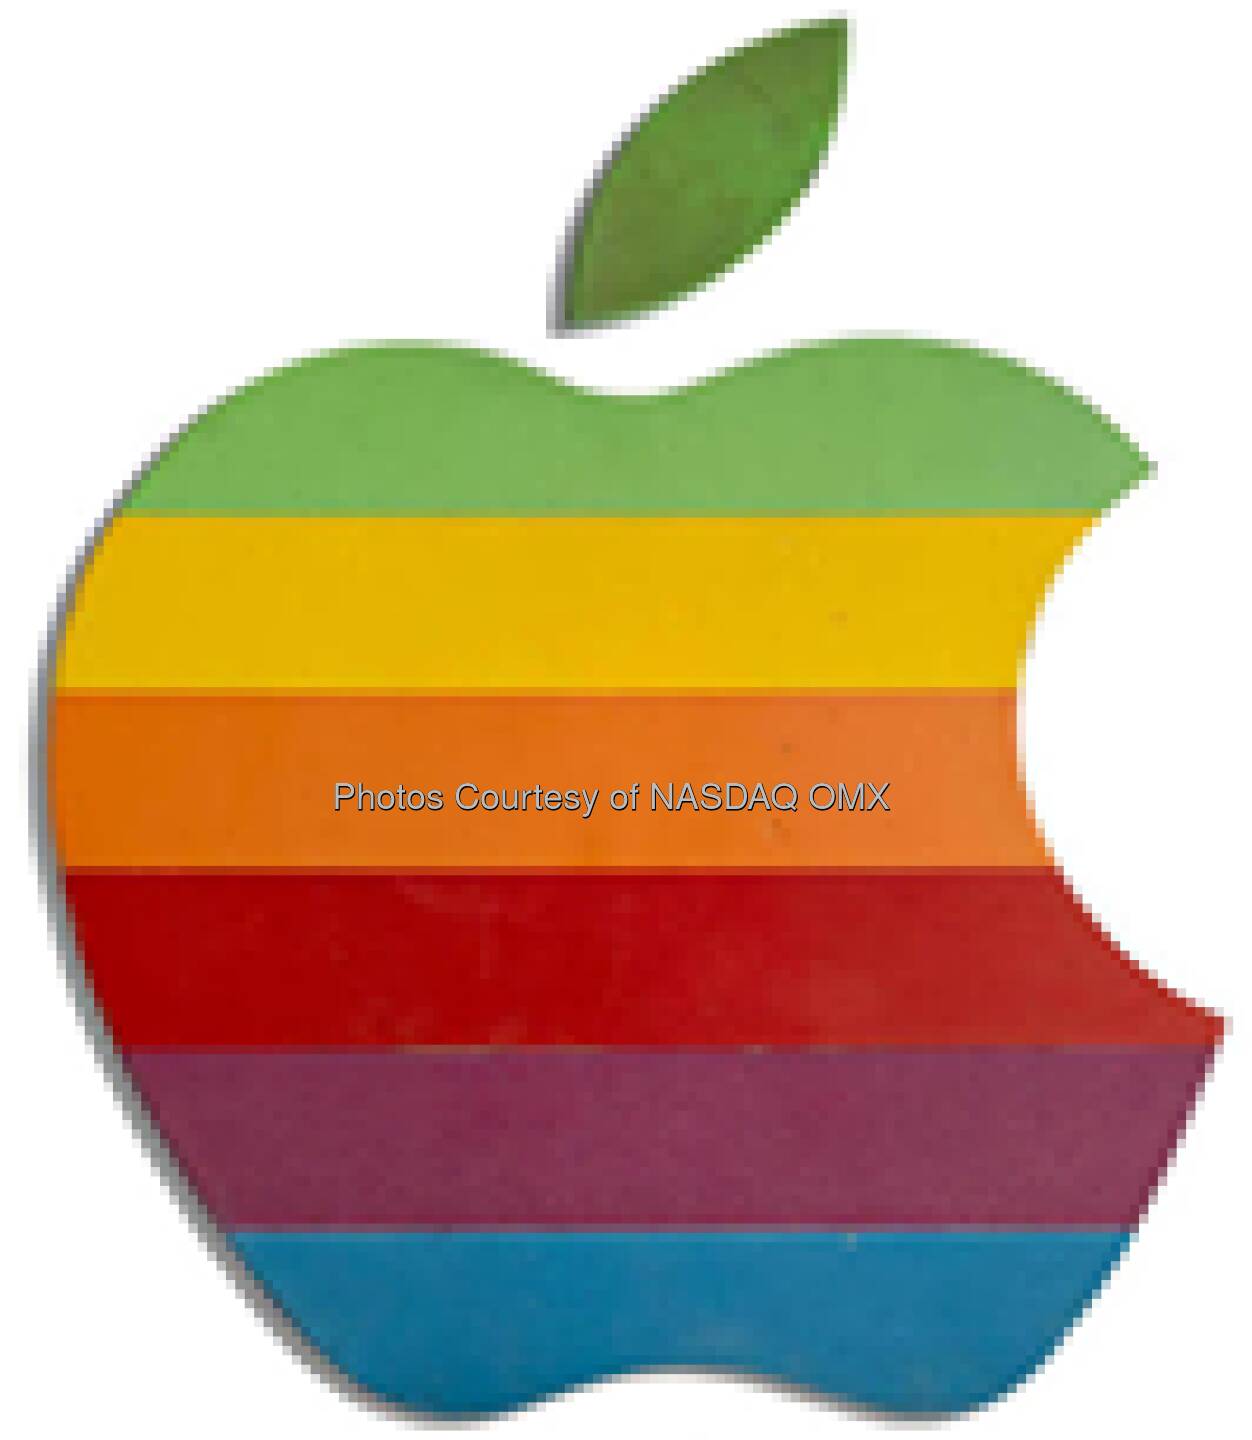 FridayFun for the Apple super fan - own a piece of Apple history. The signs are made of stiff foam and fiberglass, and were removed from Apple's Cupertino headquarters in 1997. They can be yours for a cool $15,00... Source: http://facebook.com/NASDAQ